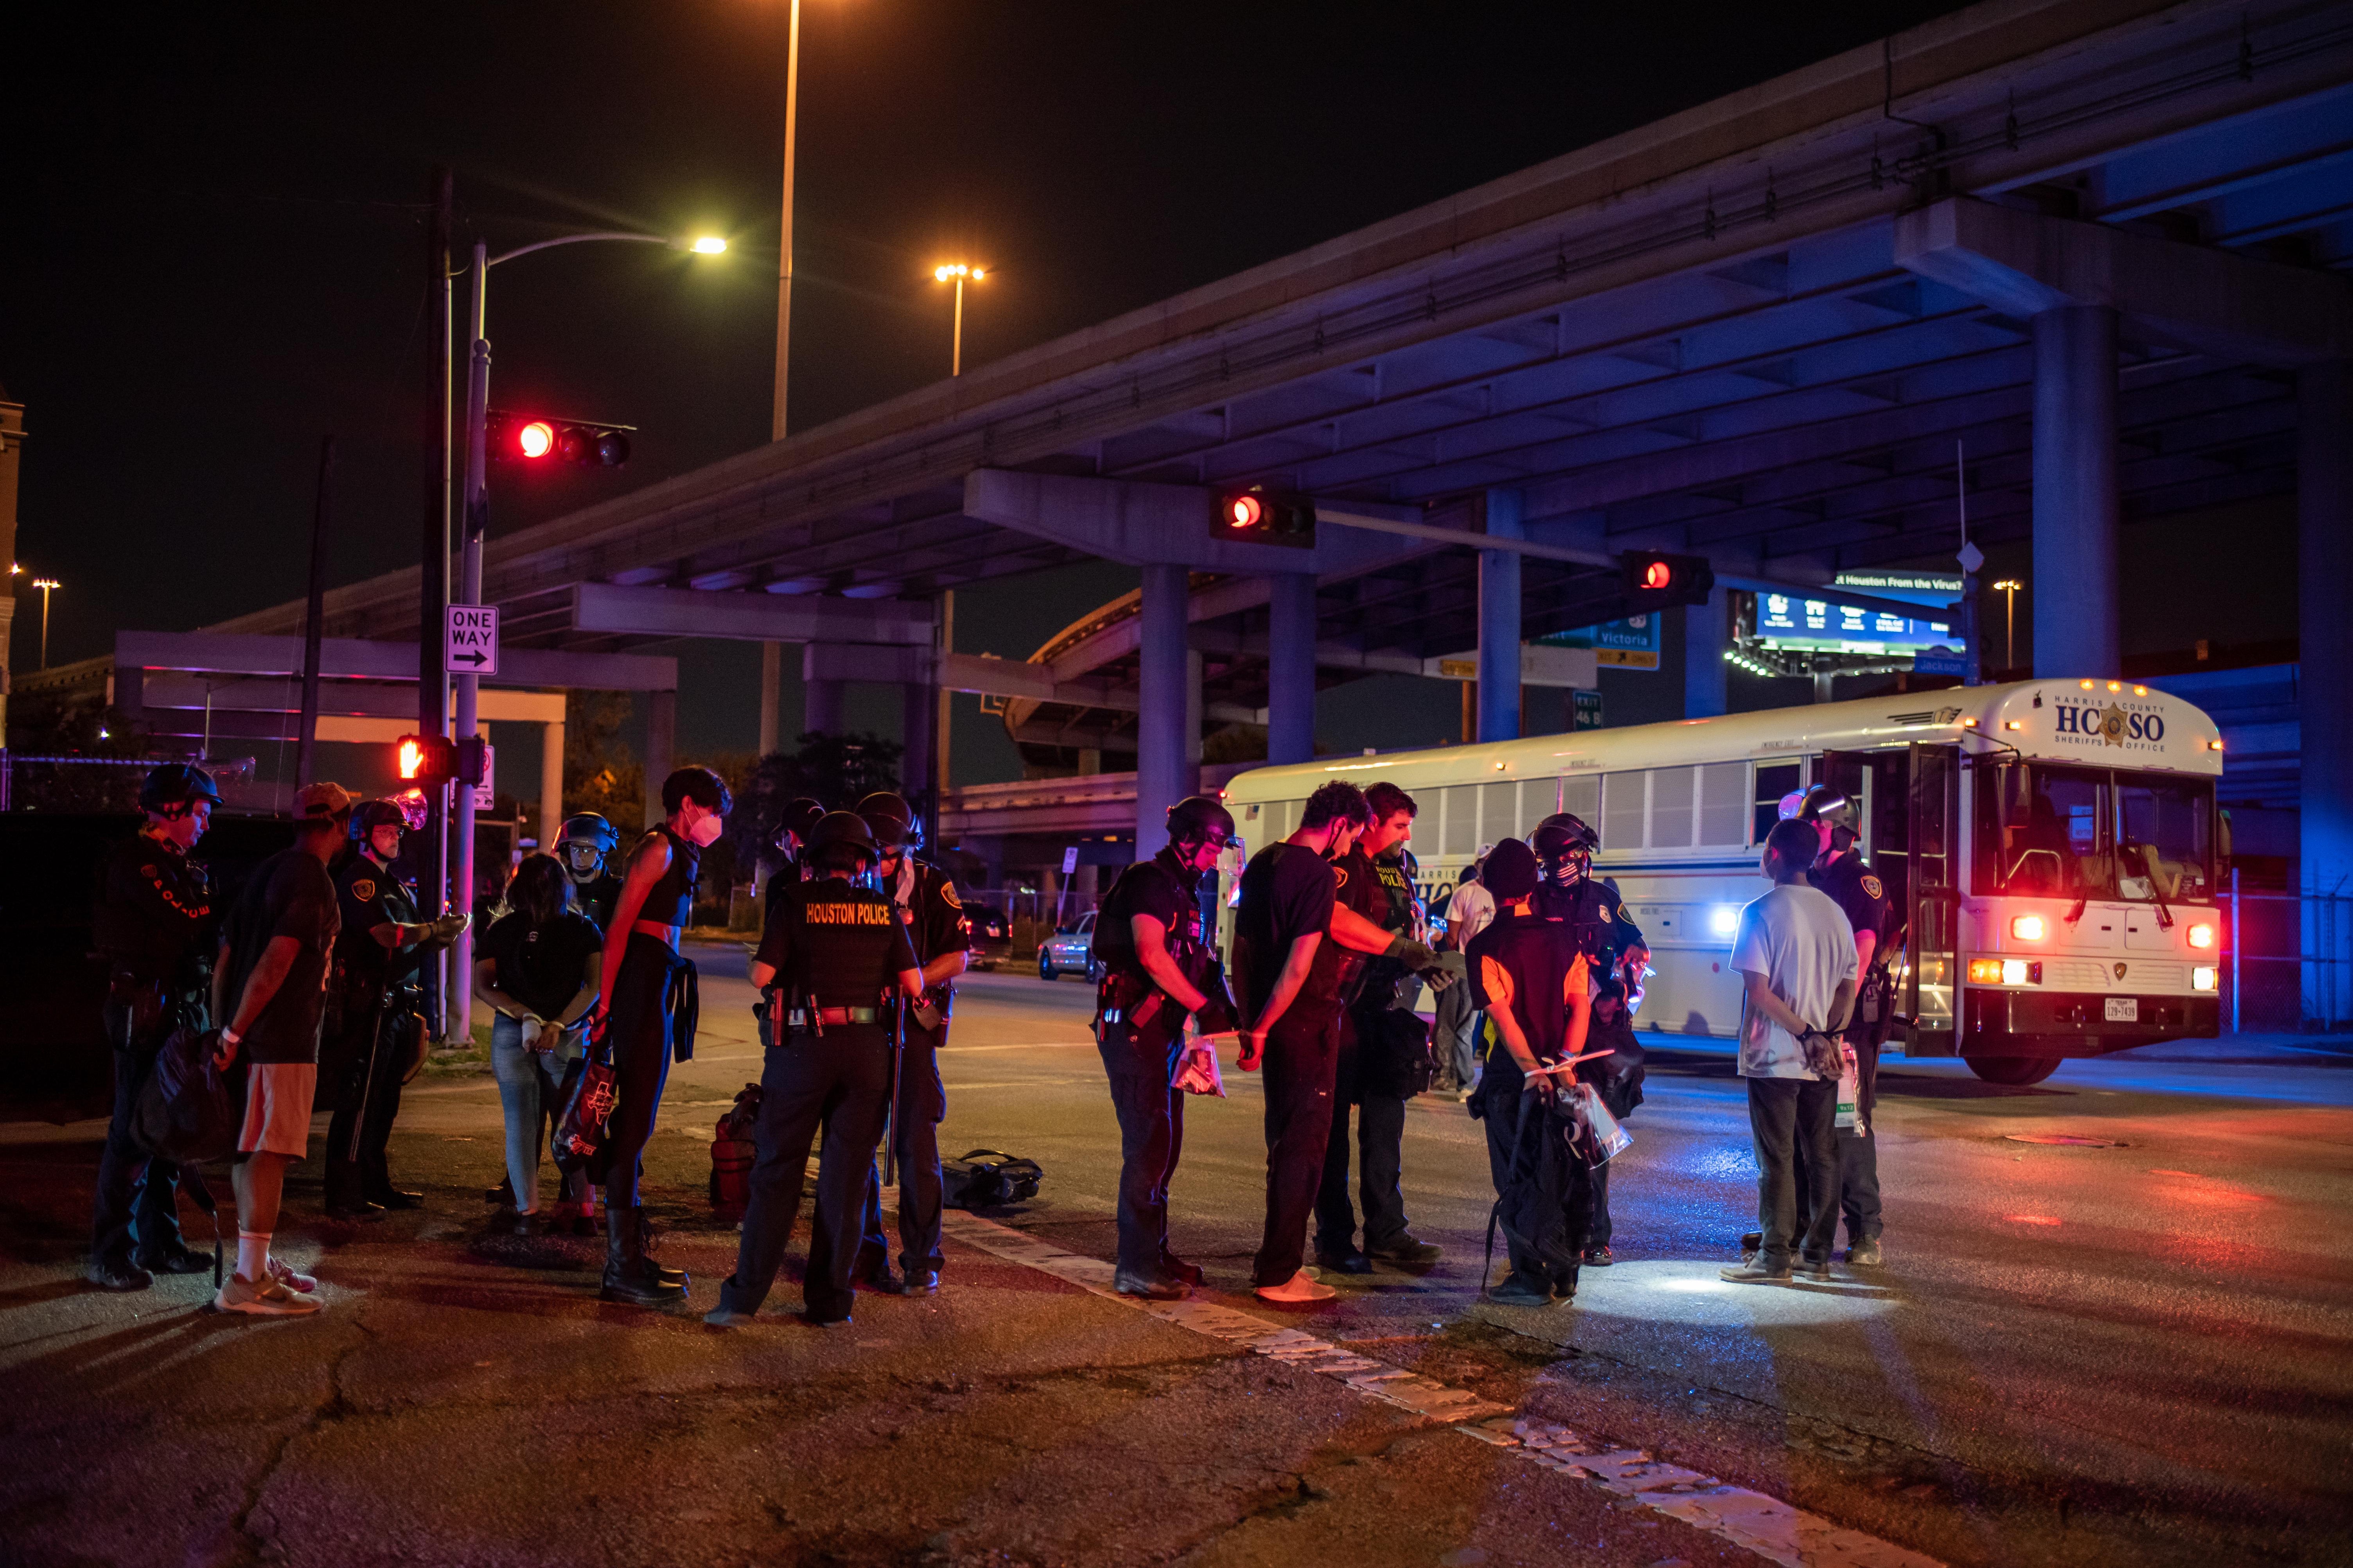 A number of handcuffed protesters with their hands tied behind their backs stand in front of a bus.